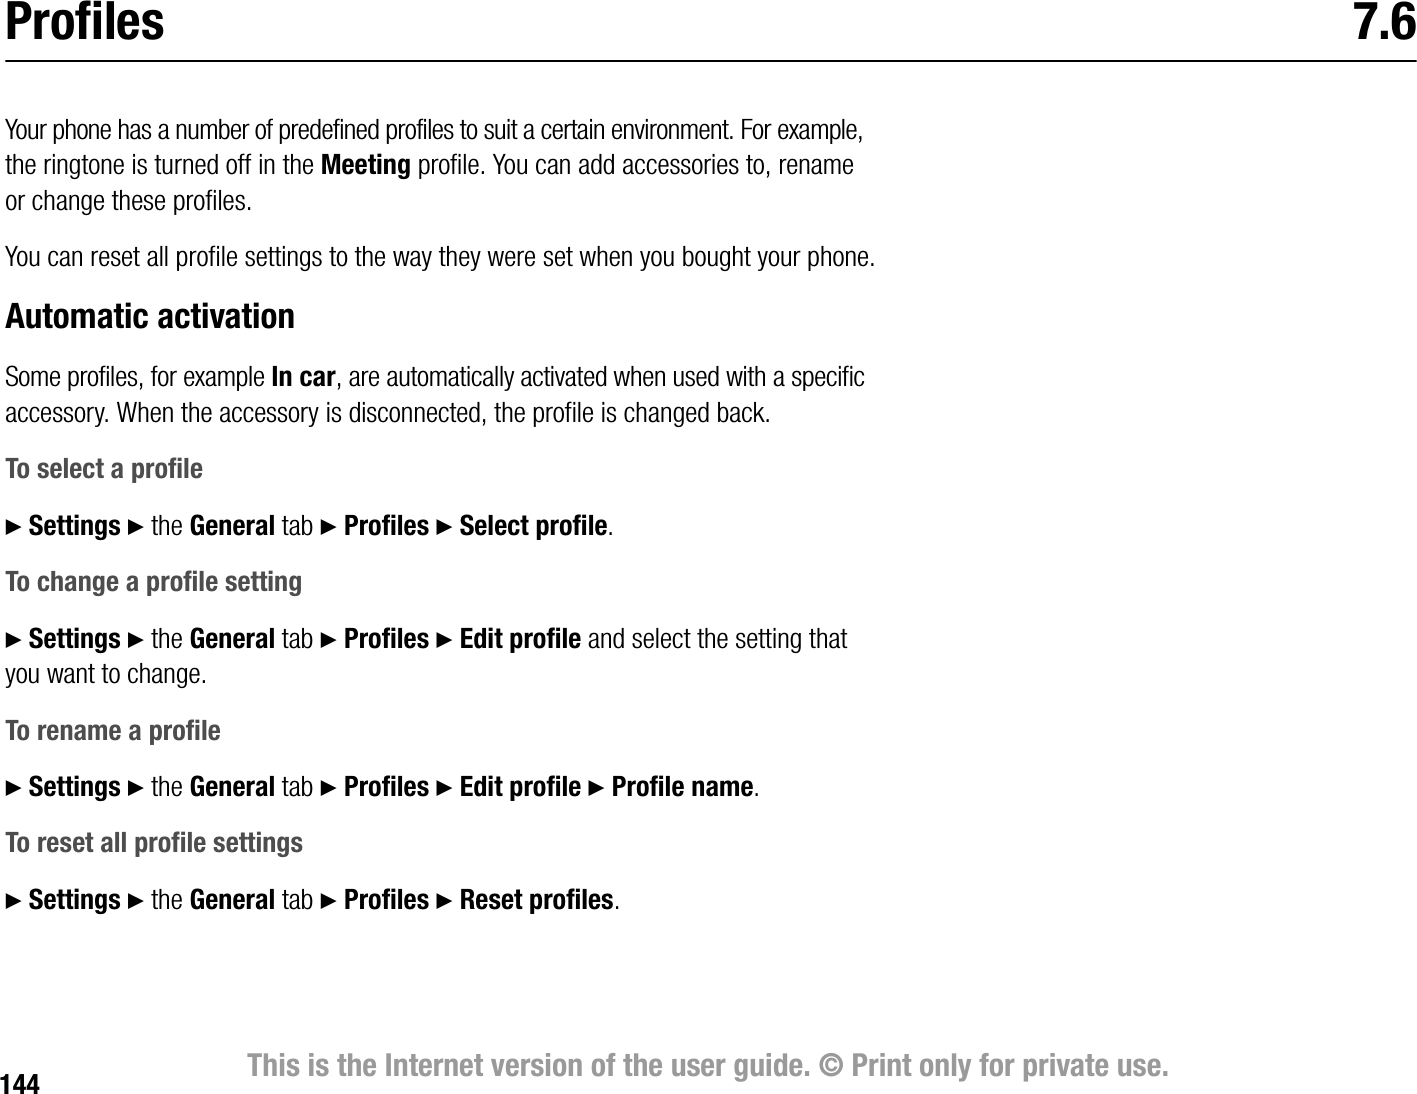 144 This is the Internet version of the user guide. © Print only for private use.Profiles 7.6Your phone has a number of predefined profiles to suit a certain environment. For example, the ringtone is turned off in the Meeting profile. You can add accessories to, rename or change these profiles. You can reset all profile settings to the way they were set when you bought your phone.Automatic activationSome profiles, for example In car, are automatically activated when used with a specific accessory. When the accessory is disconnected, the profile is changed back.To select a profile} Settings } the General tab } Profiles } Select profile.To change a profile setting} Settings } the General tab } Profiles } Edit profile and select the setting that you want to change.To rename a profile} Settings } the General tab } Profiles } Edit profile } Profile name.To reset all profile settings} Settings } the General tab } Profiles } Reset profiles.